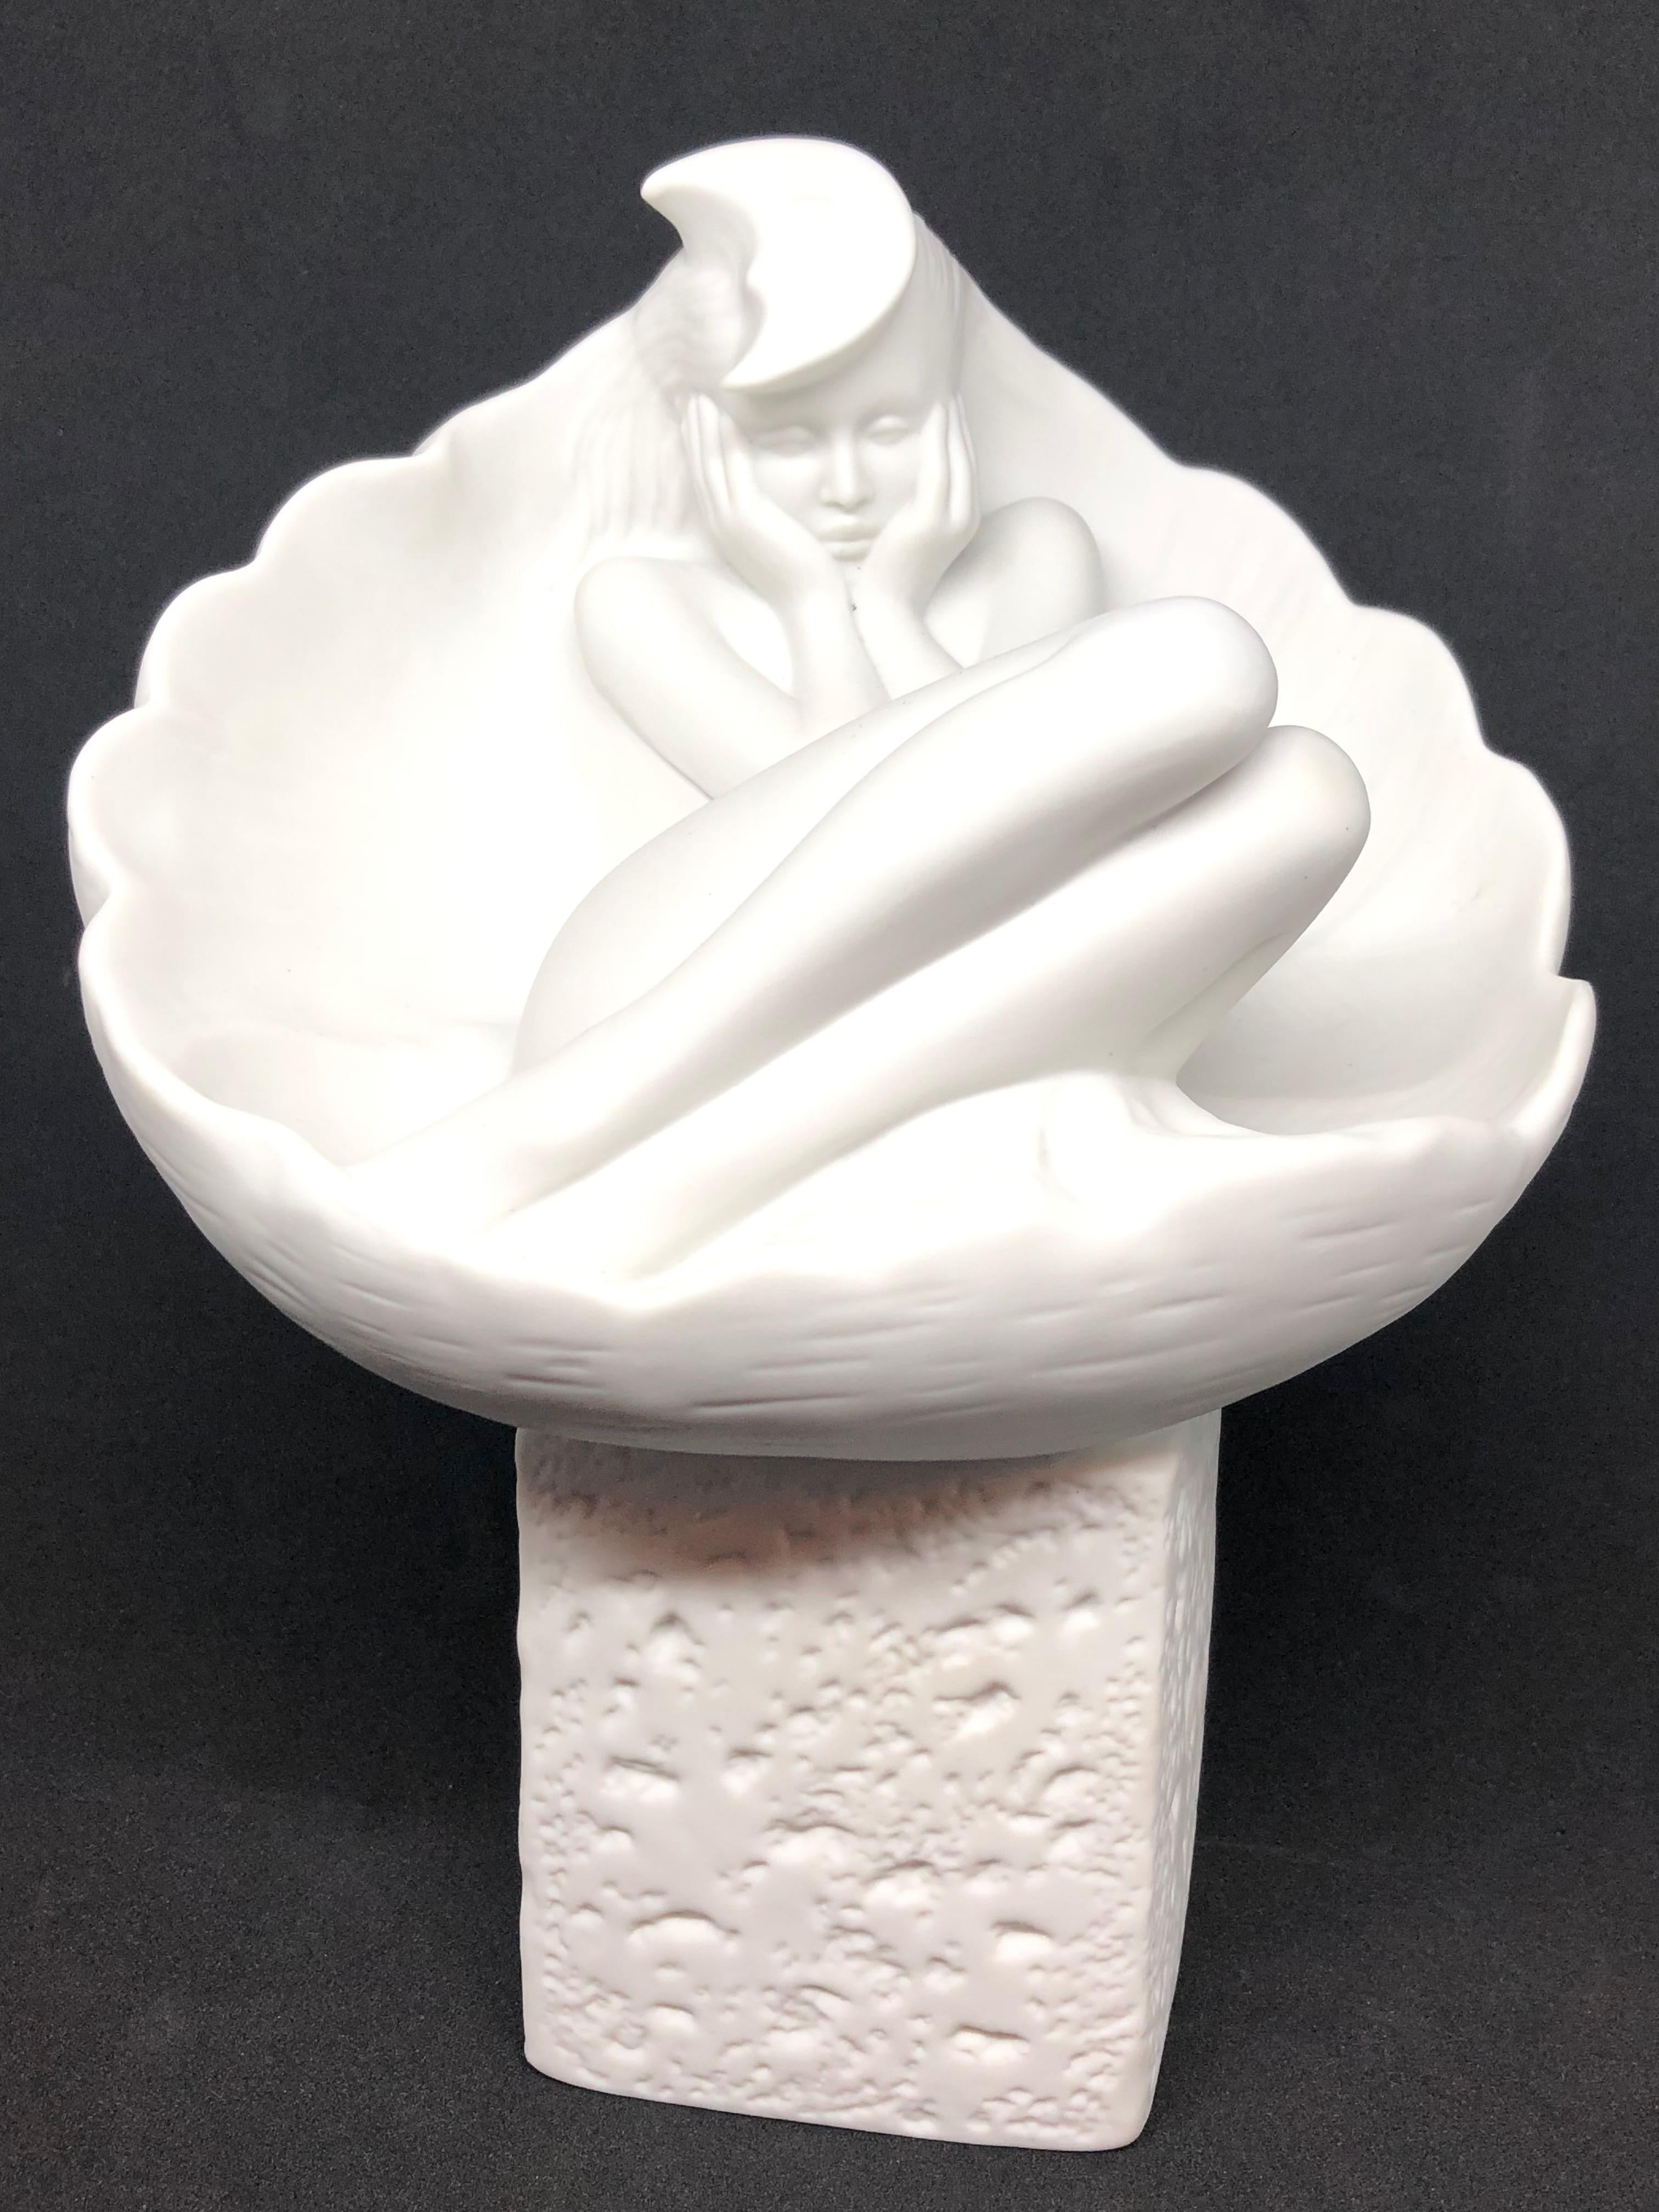 This cancer is one of the figurines in
the series of zodiac figurines from Royal
Copenhagen. The figurine was designed by the
famous Danish artist Christel Marott and
produced in bisque Porcelain. Signed with manufactory mark. Comes in original